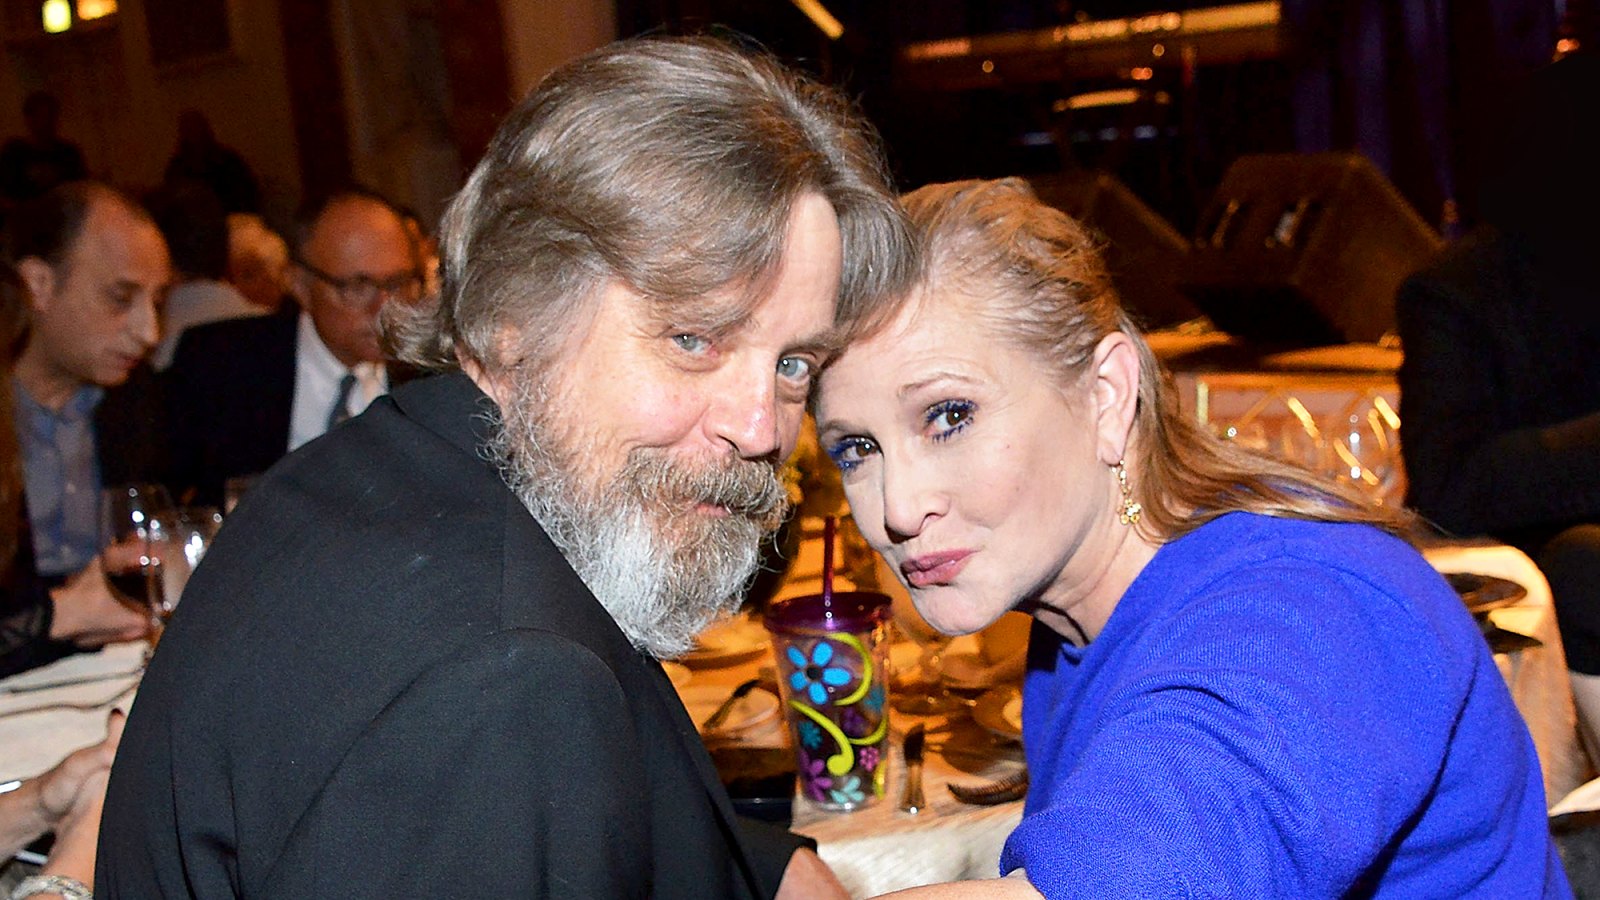 Mark Hamill and Carrie Fisher attend the Midnight Mission's 100 year anniversary Golden Heart Gala held at the Beverly Wilshire Four Seasons Hotel in Beverly Hills, California.